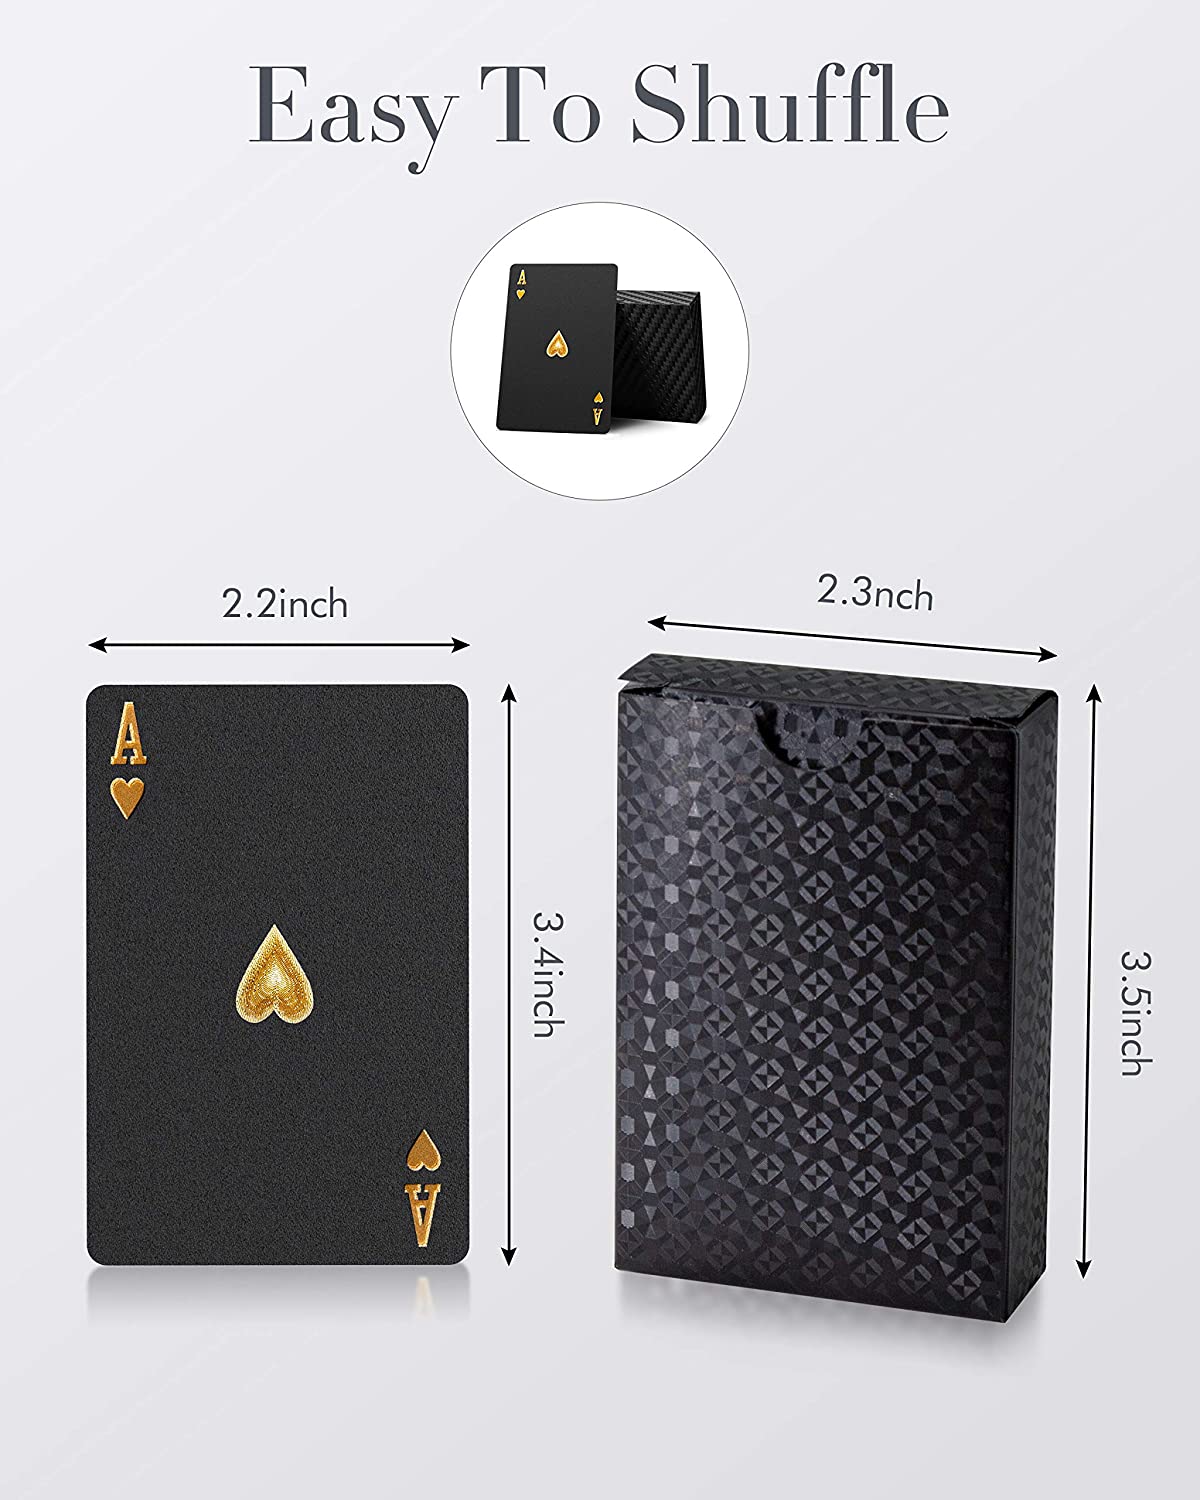 Black Matte Magic Waterproof Non Slippery Deck of Poker Cards with No Art Premium Quality 24K Gold and Silver Plated Replica Bills 8